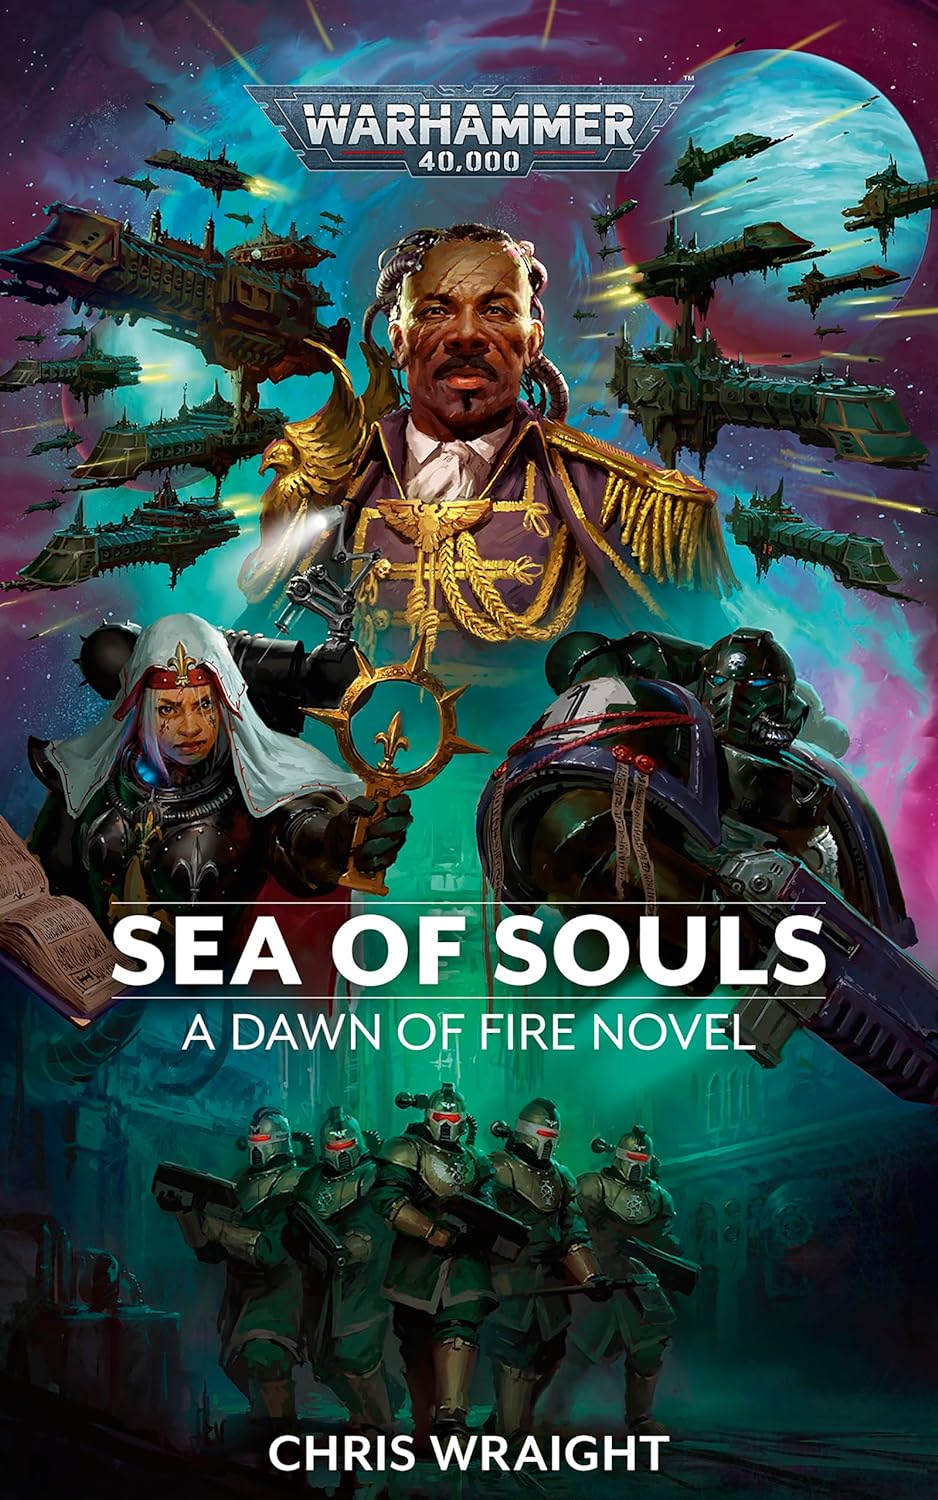 Sea of Souls by Chris Wraight